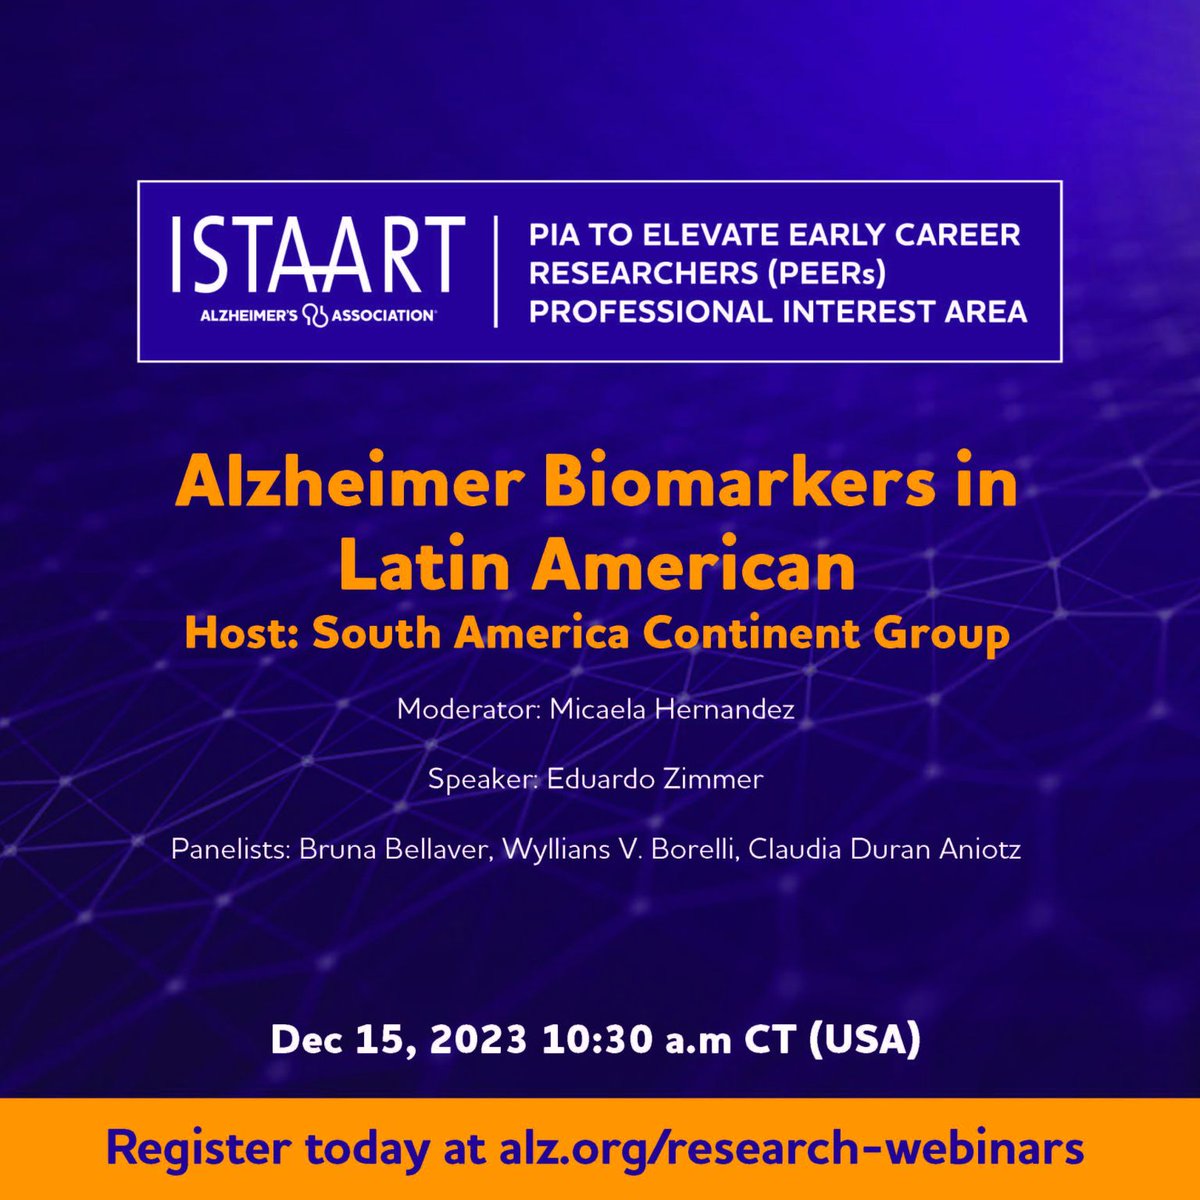 Most imaging and fluid biomarker knowledge comes from AD studies led in high-income countries. Join us on December 15th at 10:30 am (CT) to discuss state-of-the-art AD imaging and fluid biomarkers in Latin America, highlighting barriers and potential solutions. Register today!